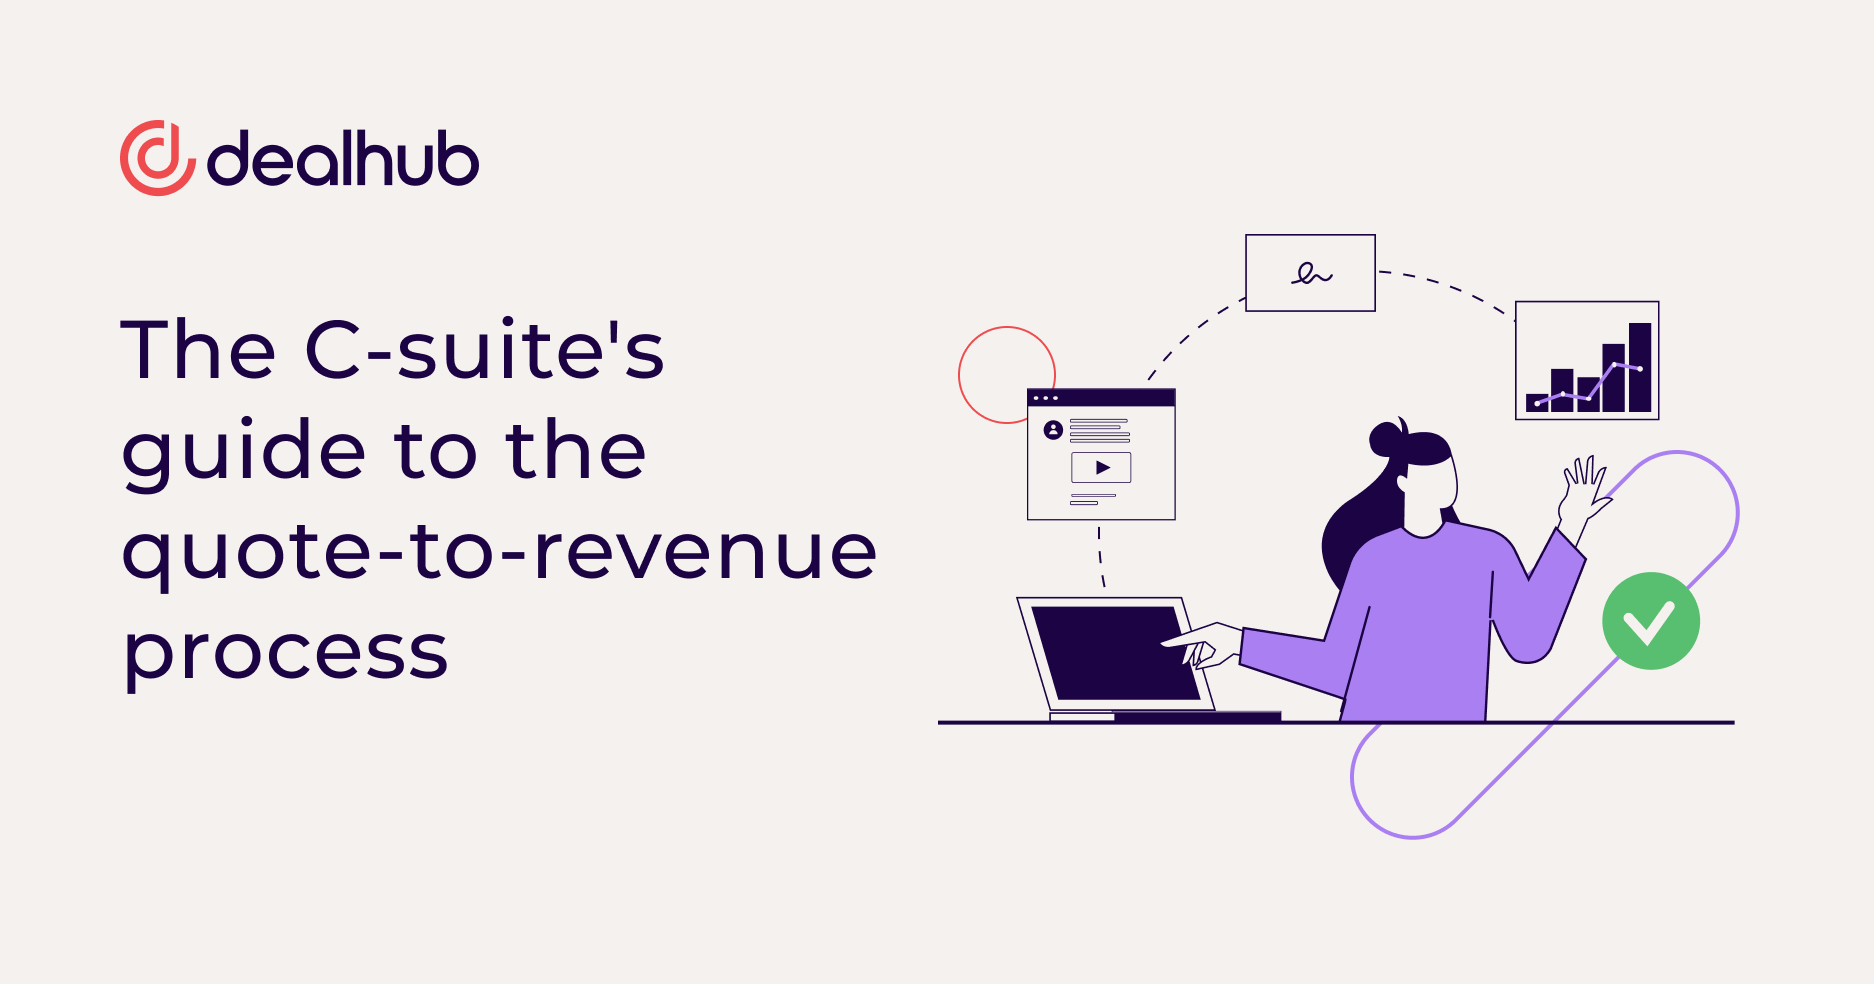 The C-suite's guide to the quote-to-revenue process